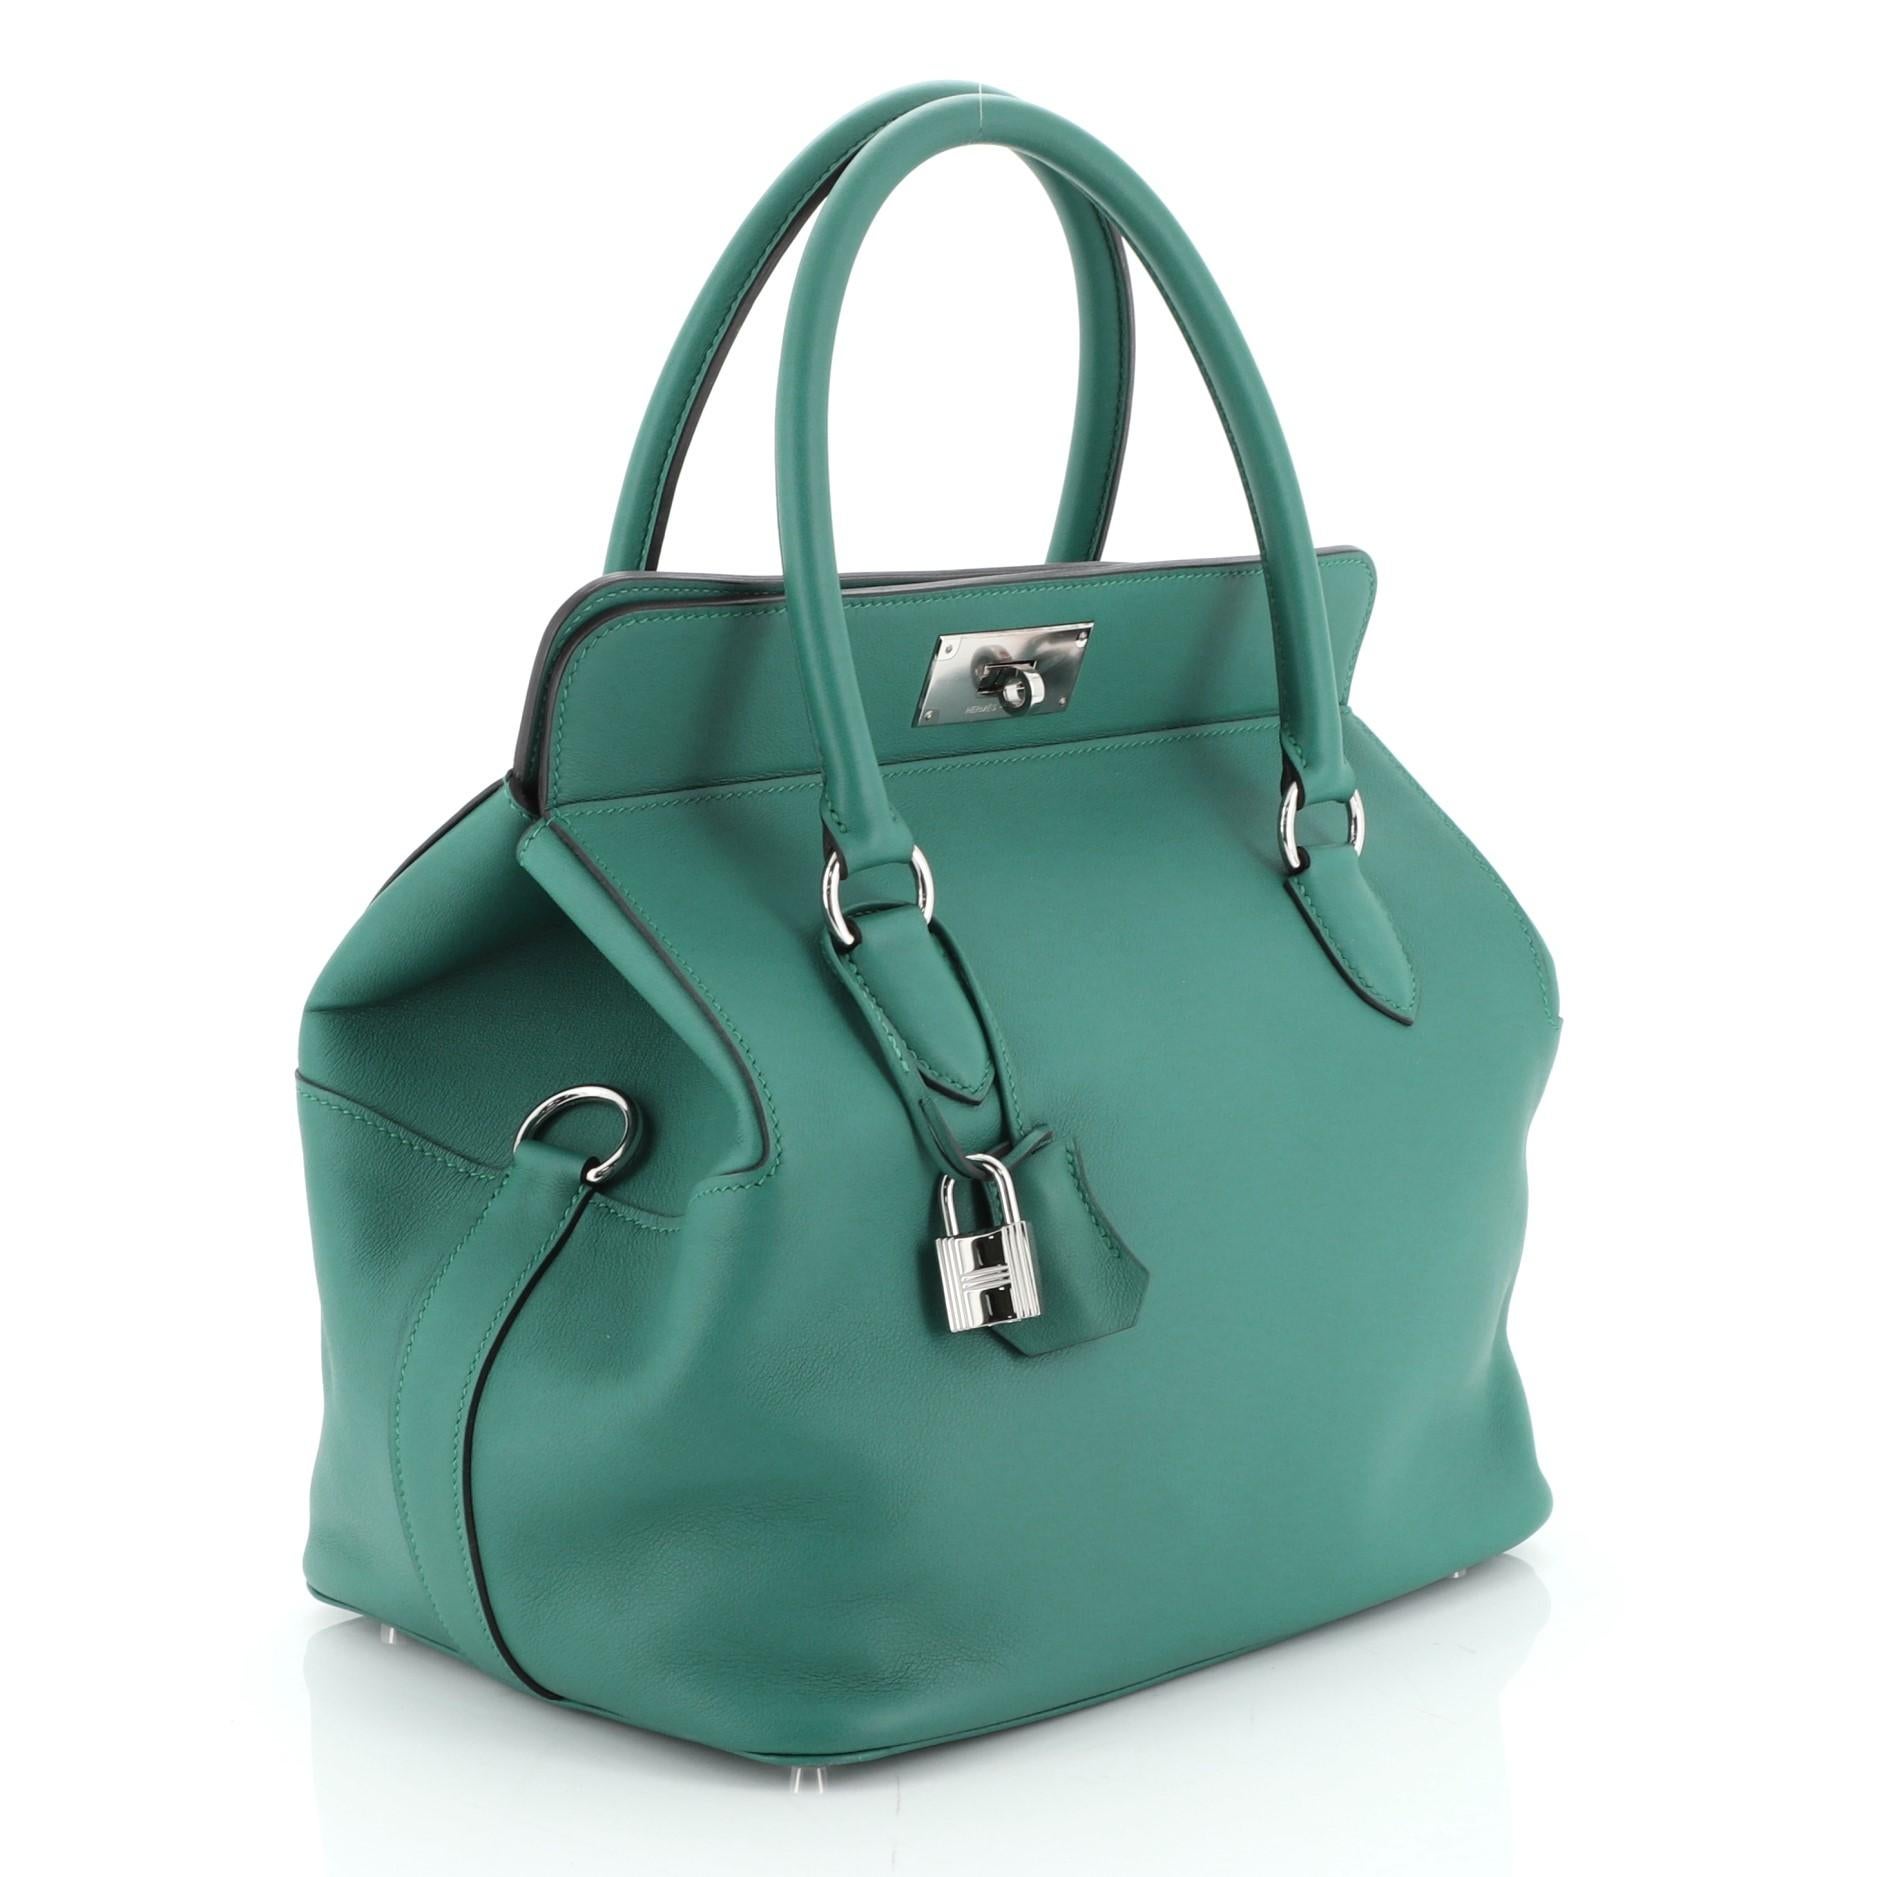 This Hermes Toolbox Handbag Swift 26, crafted from Malachite green Swift leather, features dual rolled handles, soft framed top, protective base studs, and palladium hardware. Its turn-lock closure opens to a Malachite green Swift leather interior